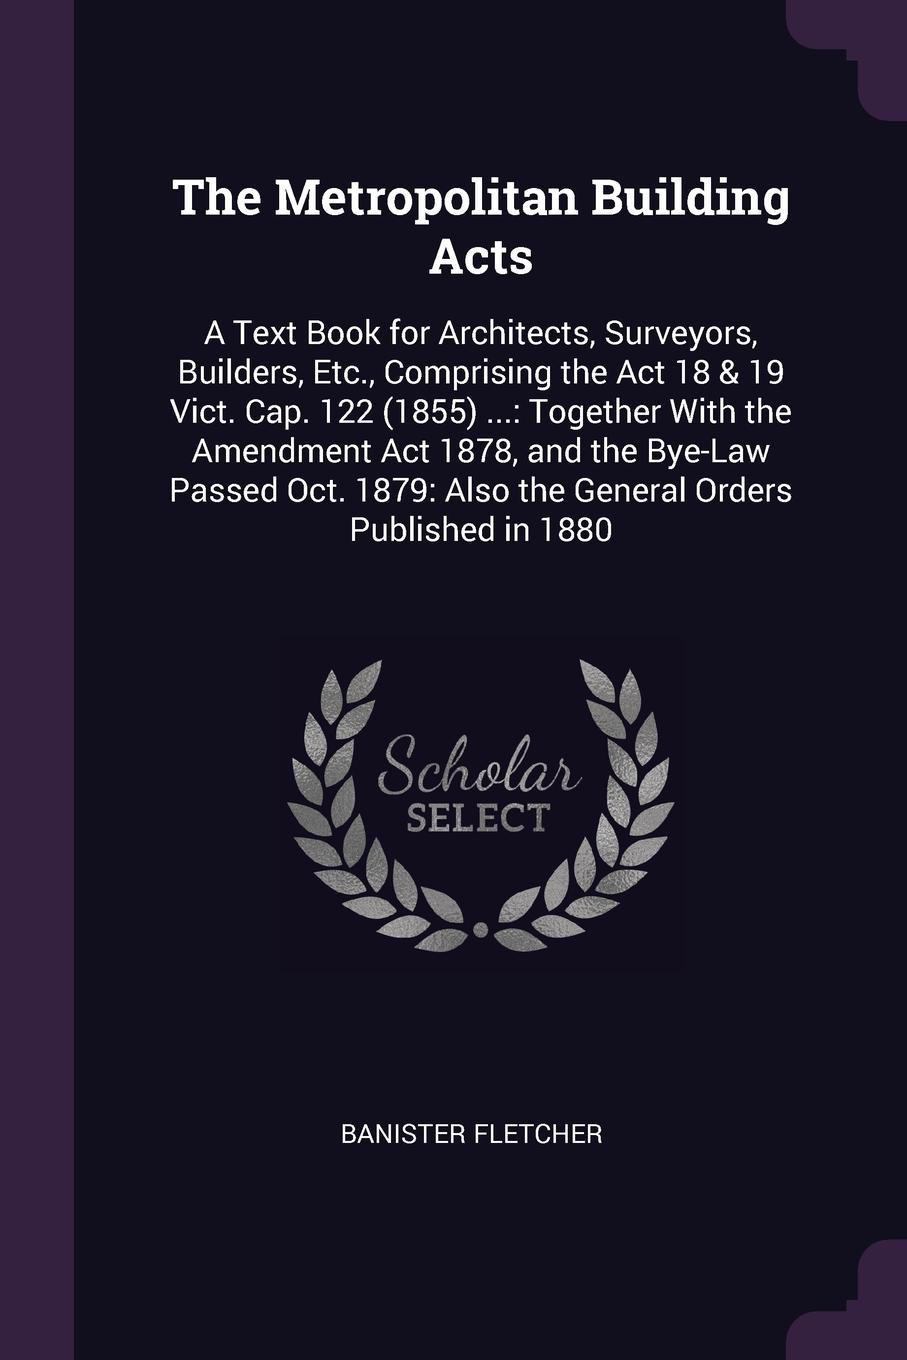 The Metropolitan Building Acts. A Text Book for Architects, Surveyors, Builders, Etc., Comprising the Act 18 & 19 Vict. Cap. 122 (1855) ...: Together With the Amendment Act 1878, and the Bye-Law Passed Oct. 1879: Also the General Orders Published ...